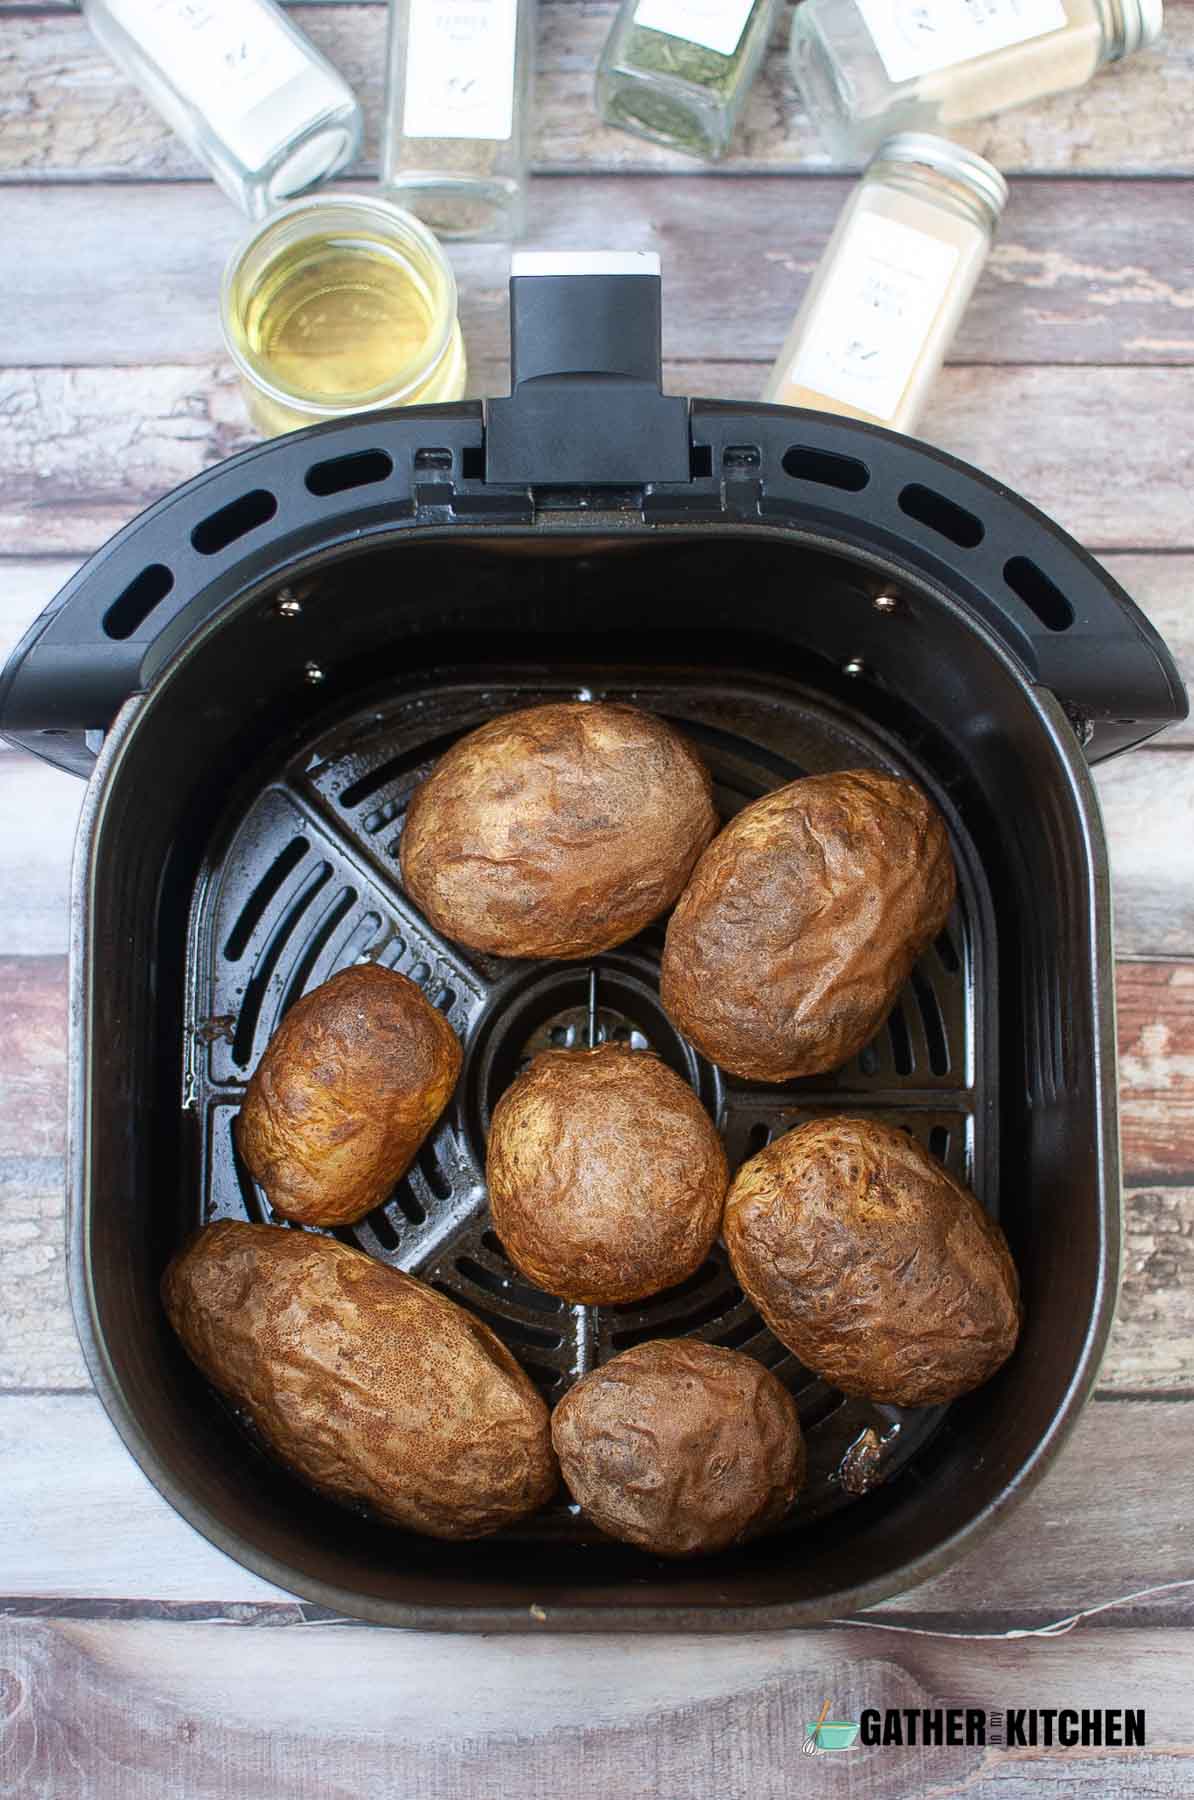 Cooked potatoes in air fryer basket.